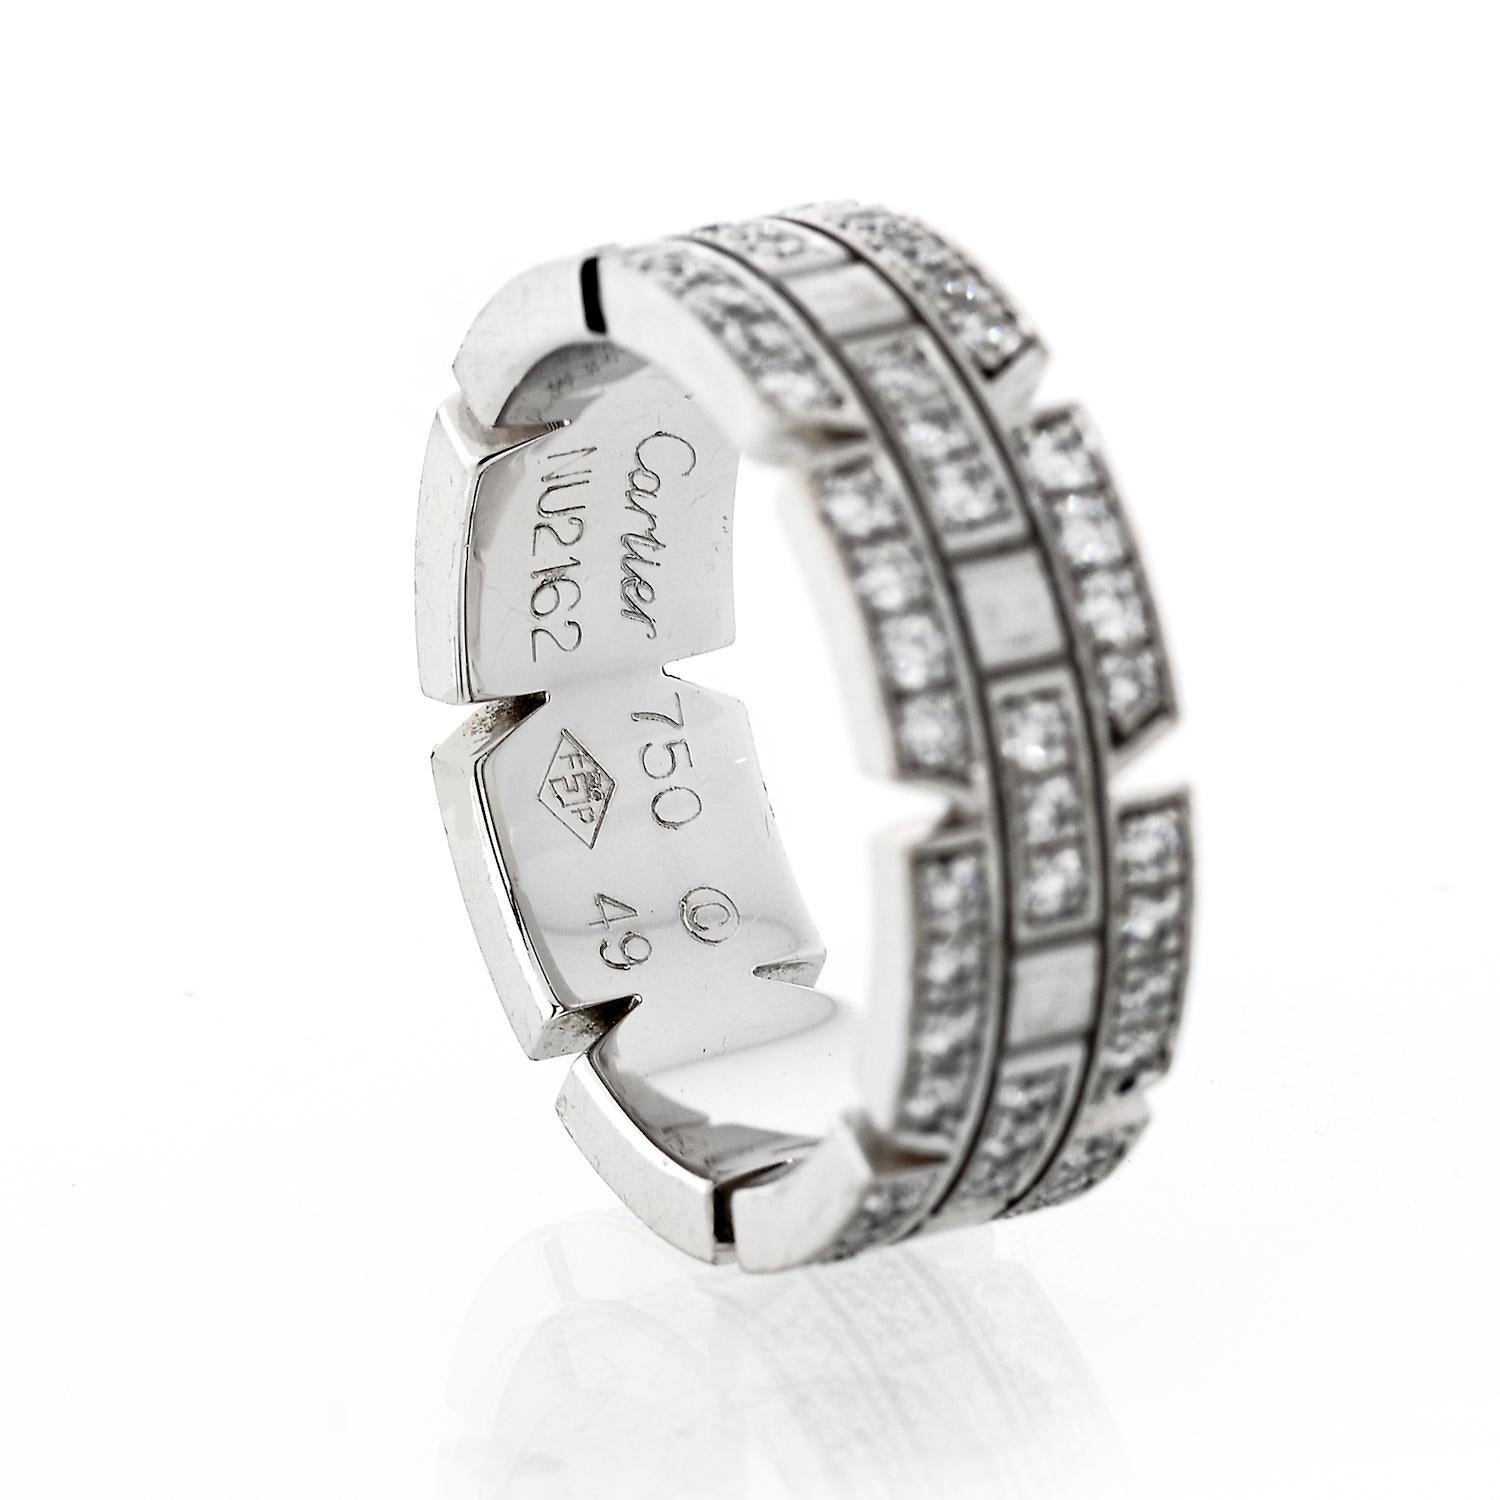 Cartier Tank Francaise Diamond Ring in White Gold 1